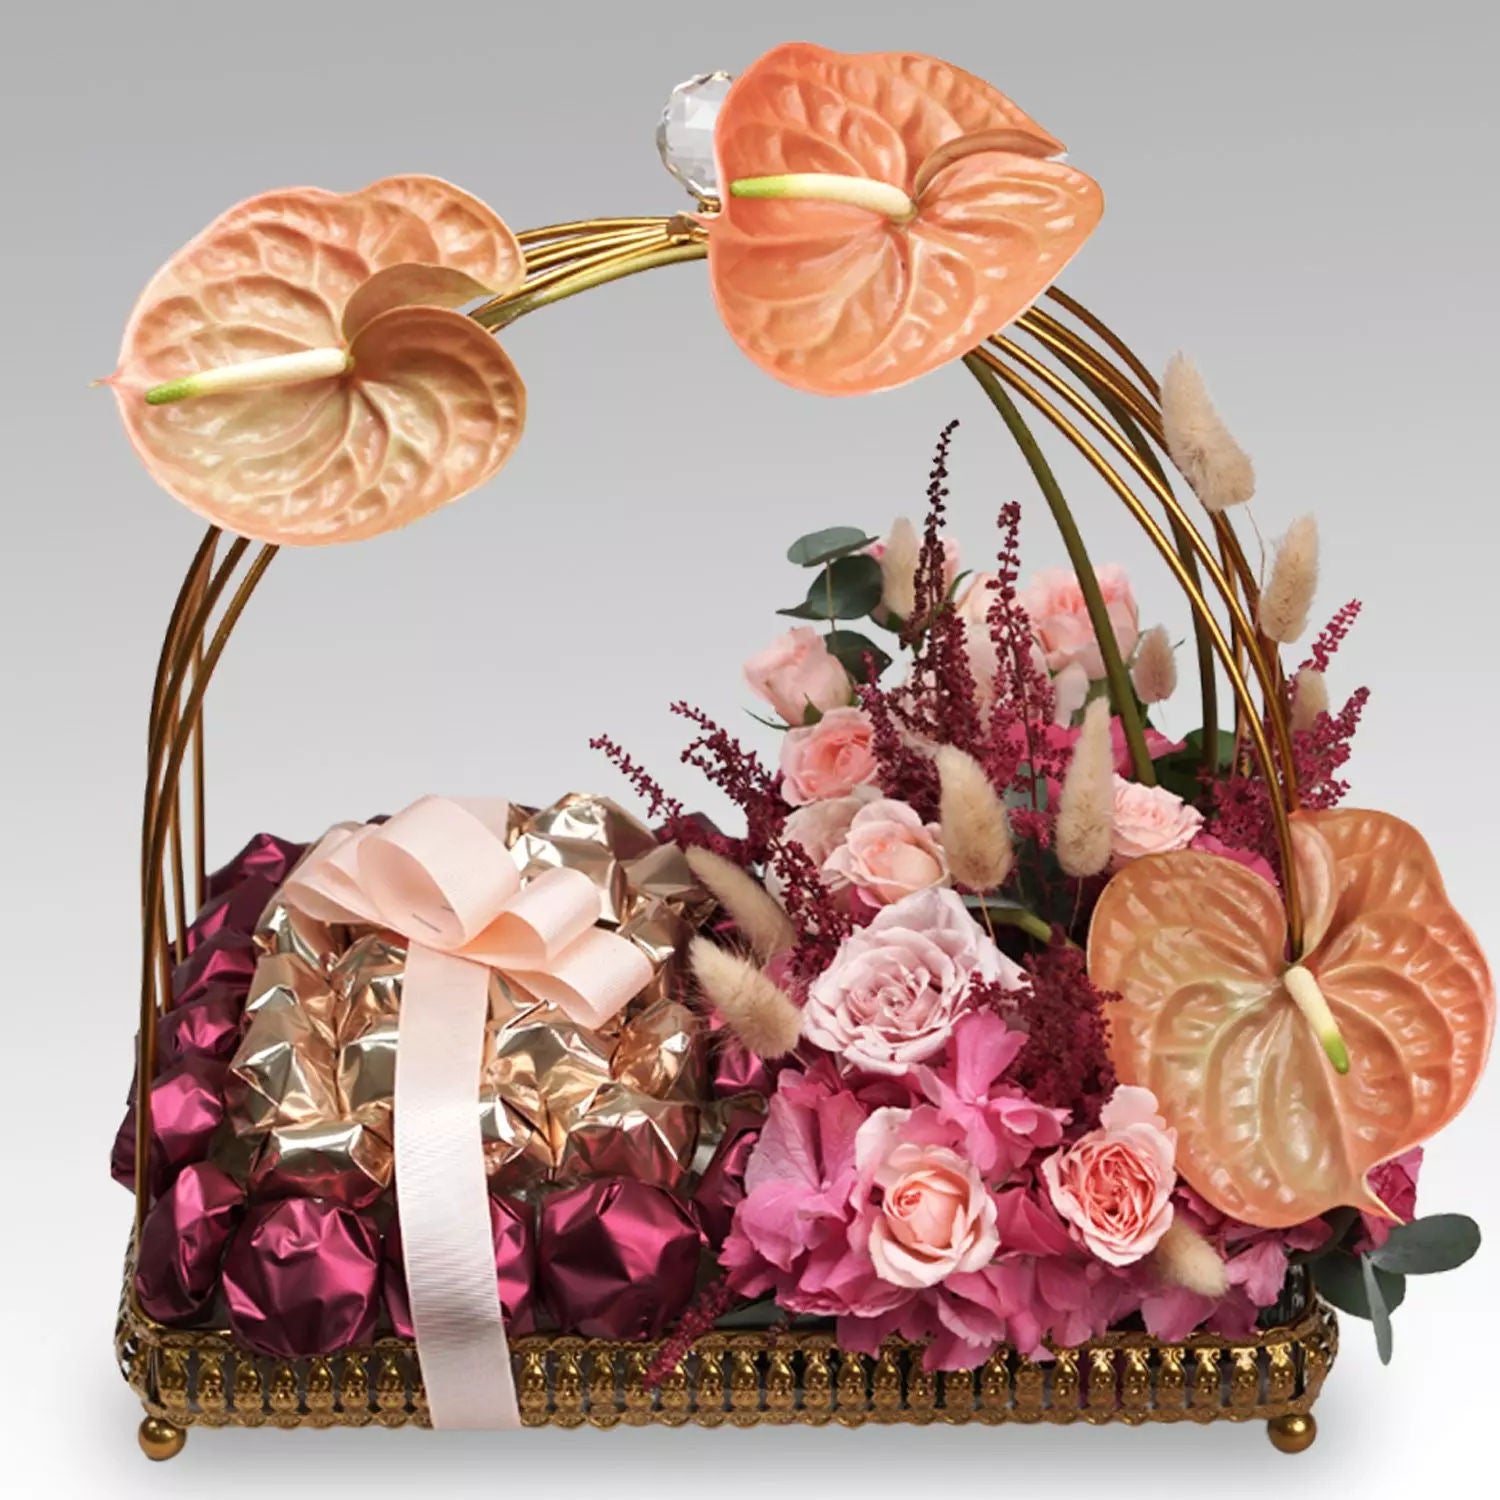 Mixed Flowers & Chocolates In A Cage